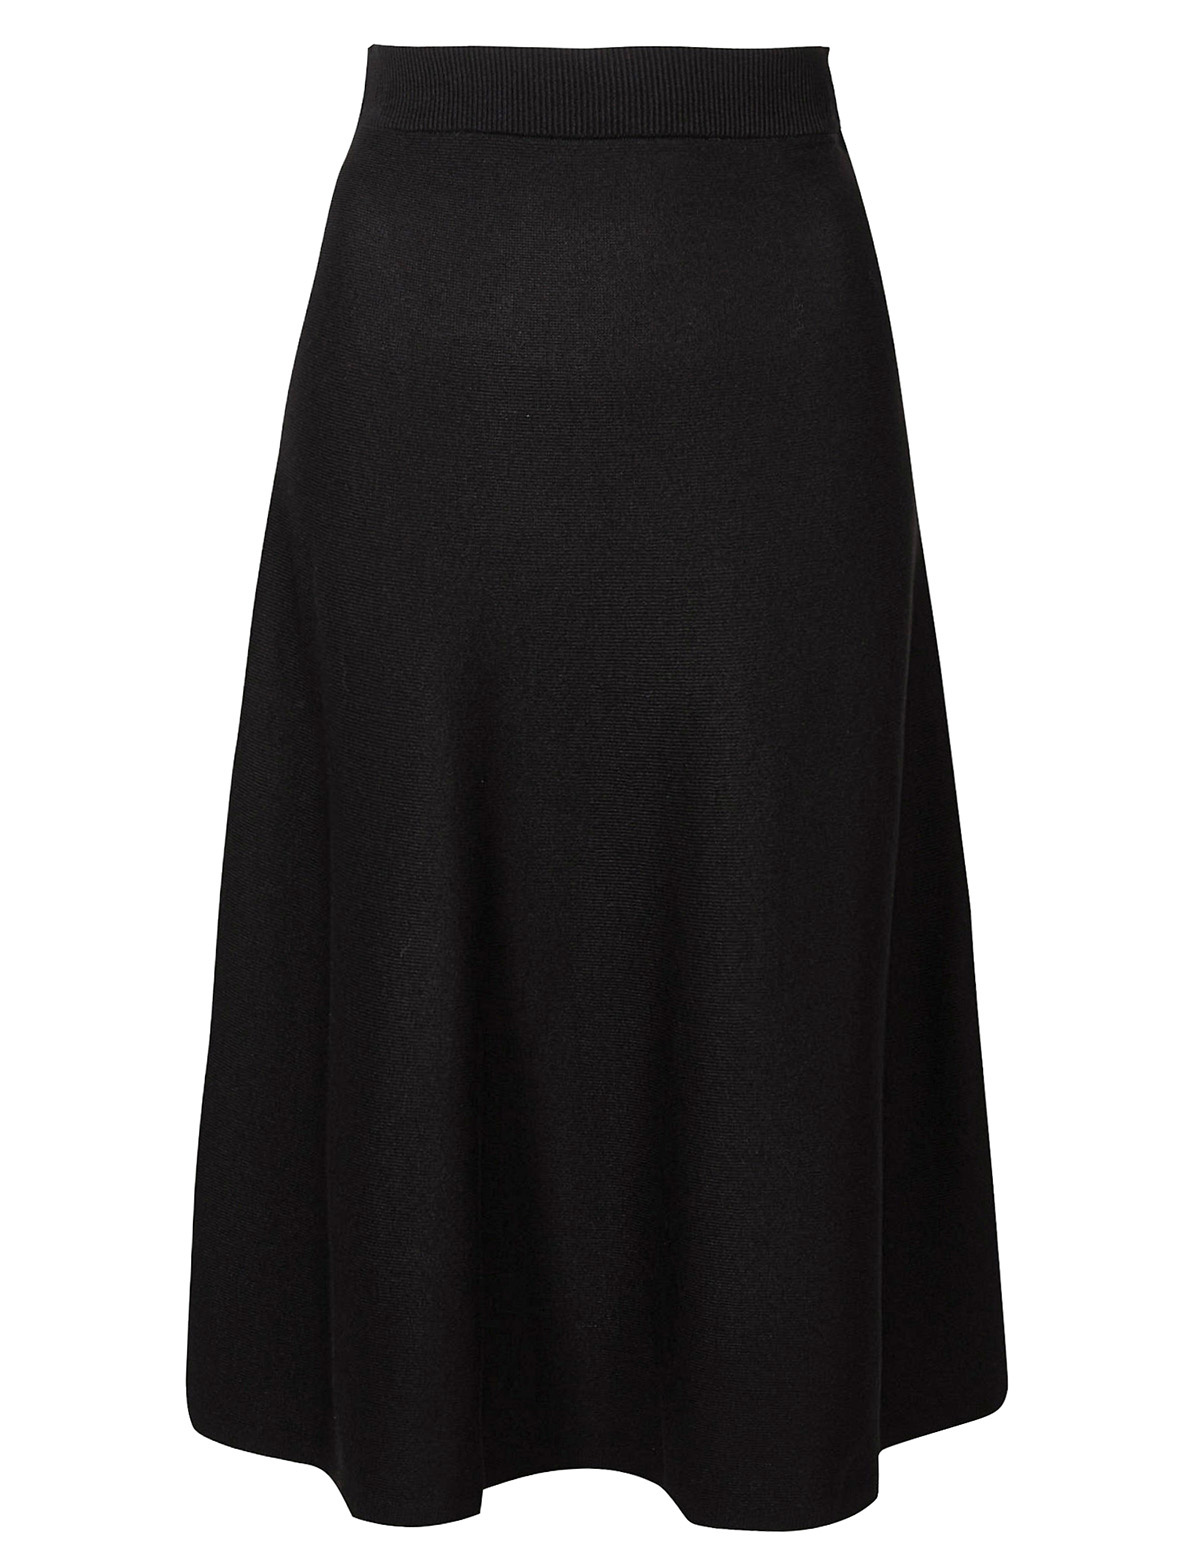 Marks and Spencer - - M&5 BLACK Knitted Full Skirt - Size 8 to 10